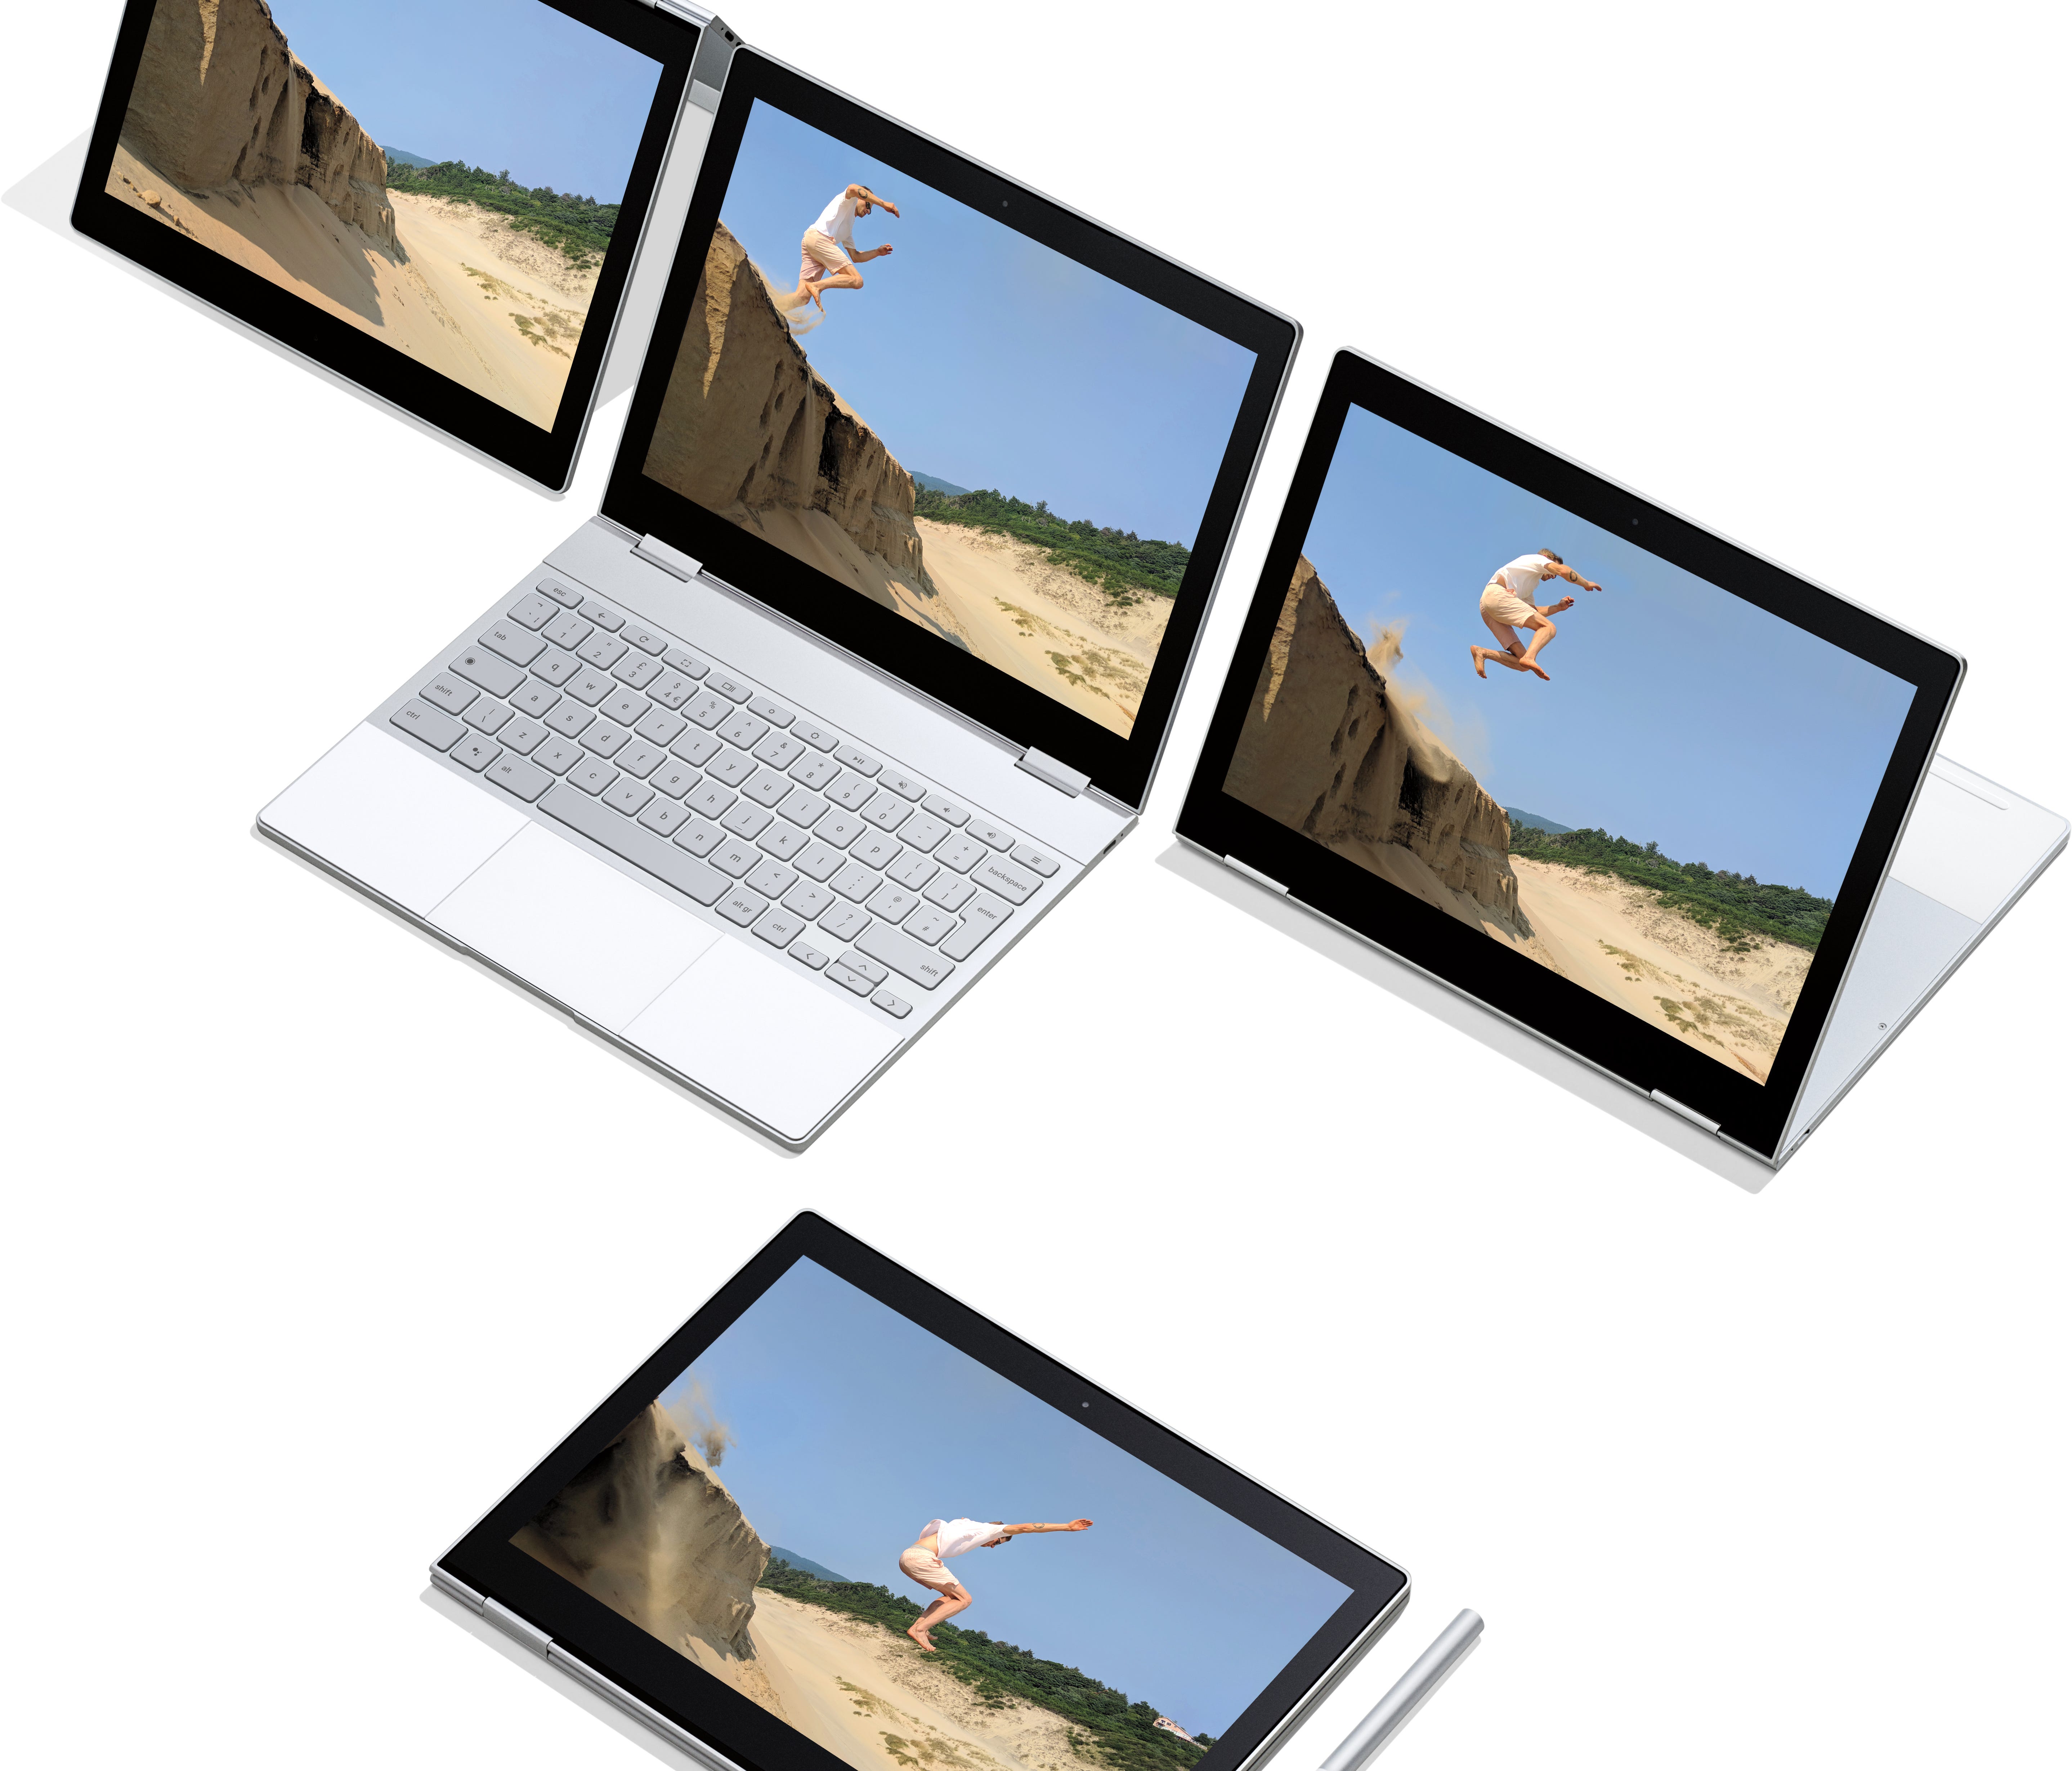 Google Pixelbook can be folded into different positions